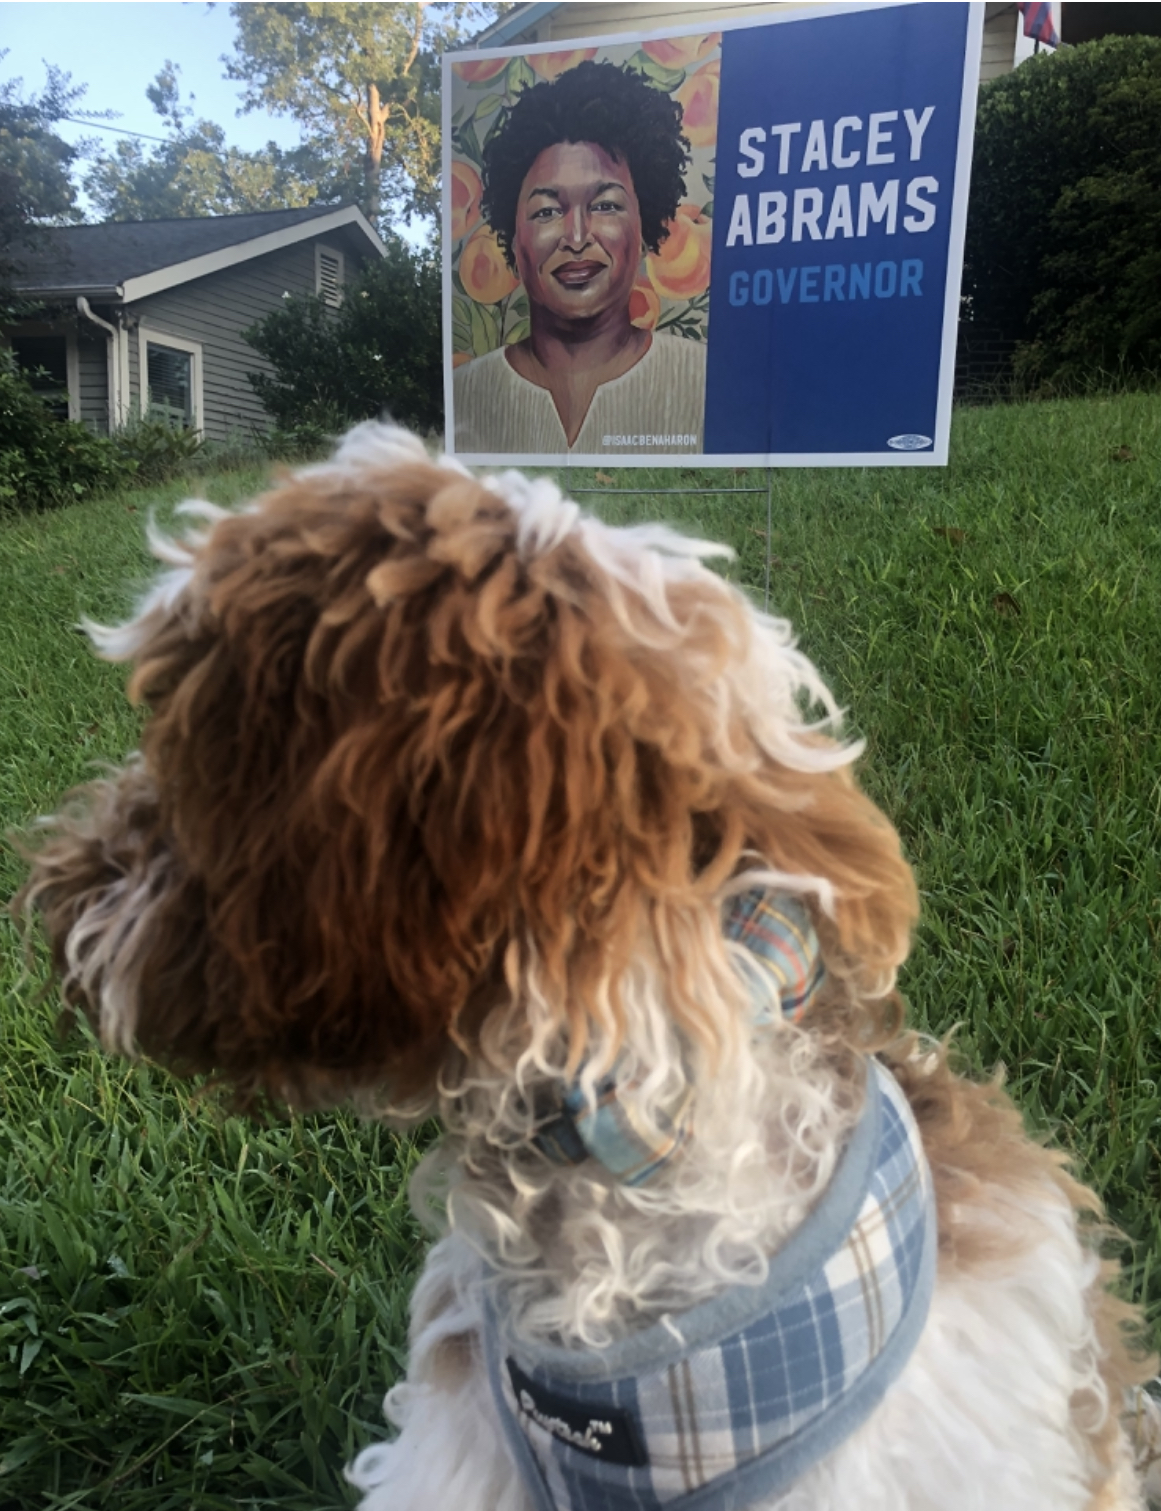 Franklin and Stacey Abrams signage